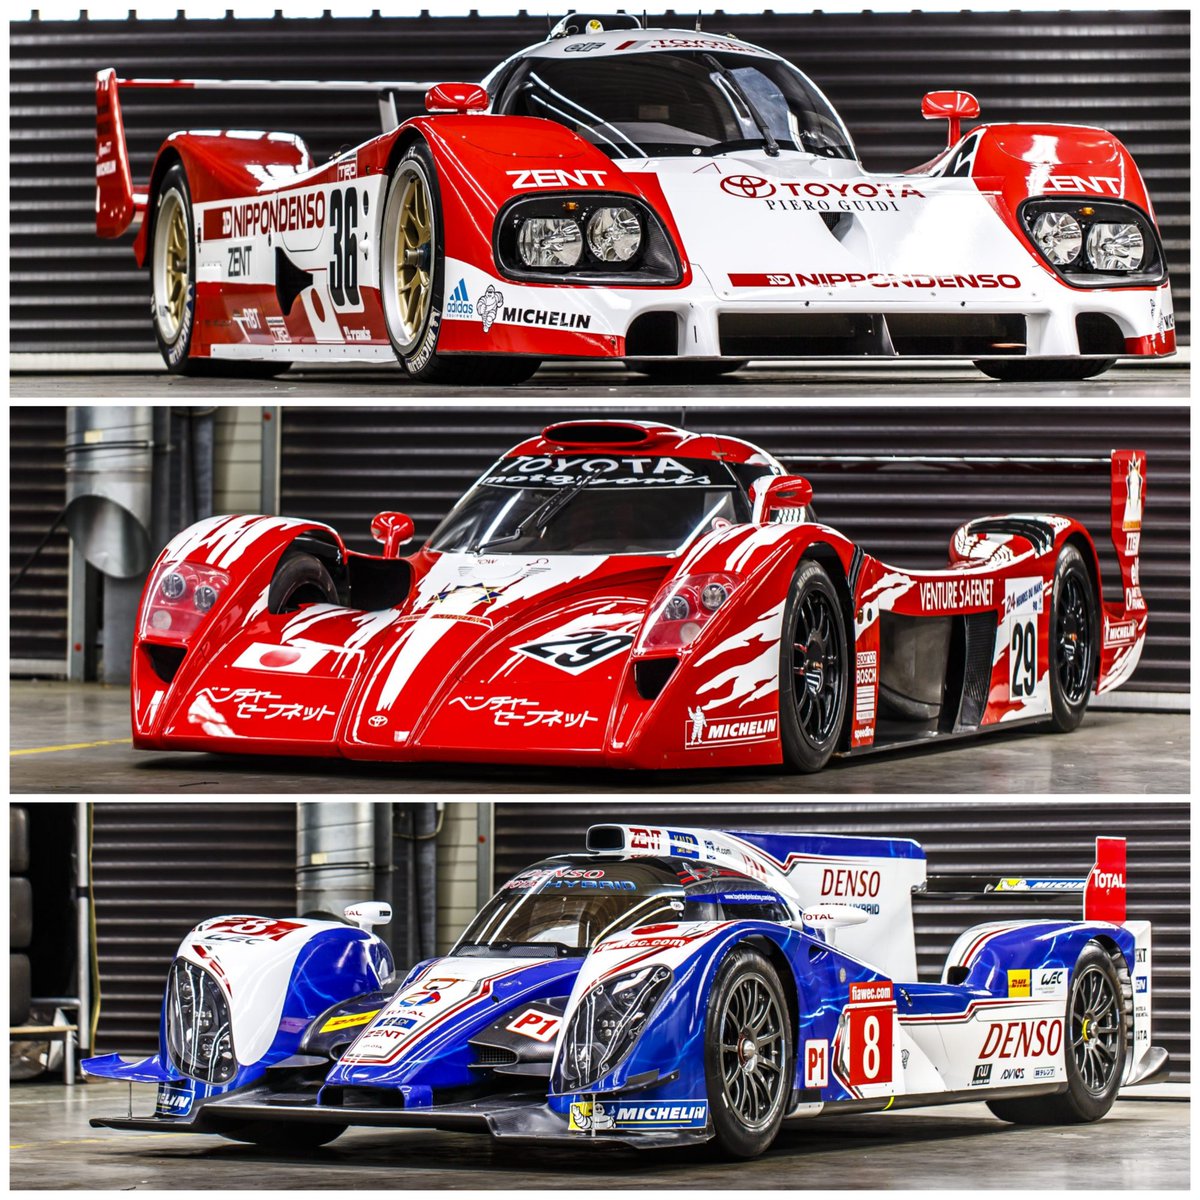 Three great Toyota #LeMans24 racers, which one do you prefer?

Toyota TS010
Toyota TS020 (GT-One)
Toyota TS030

📸 Toyota